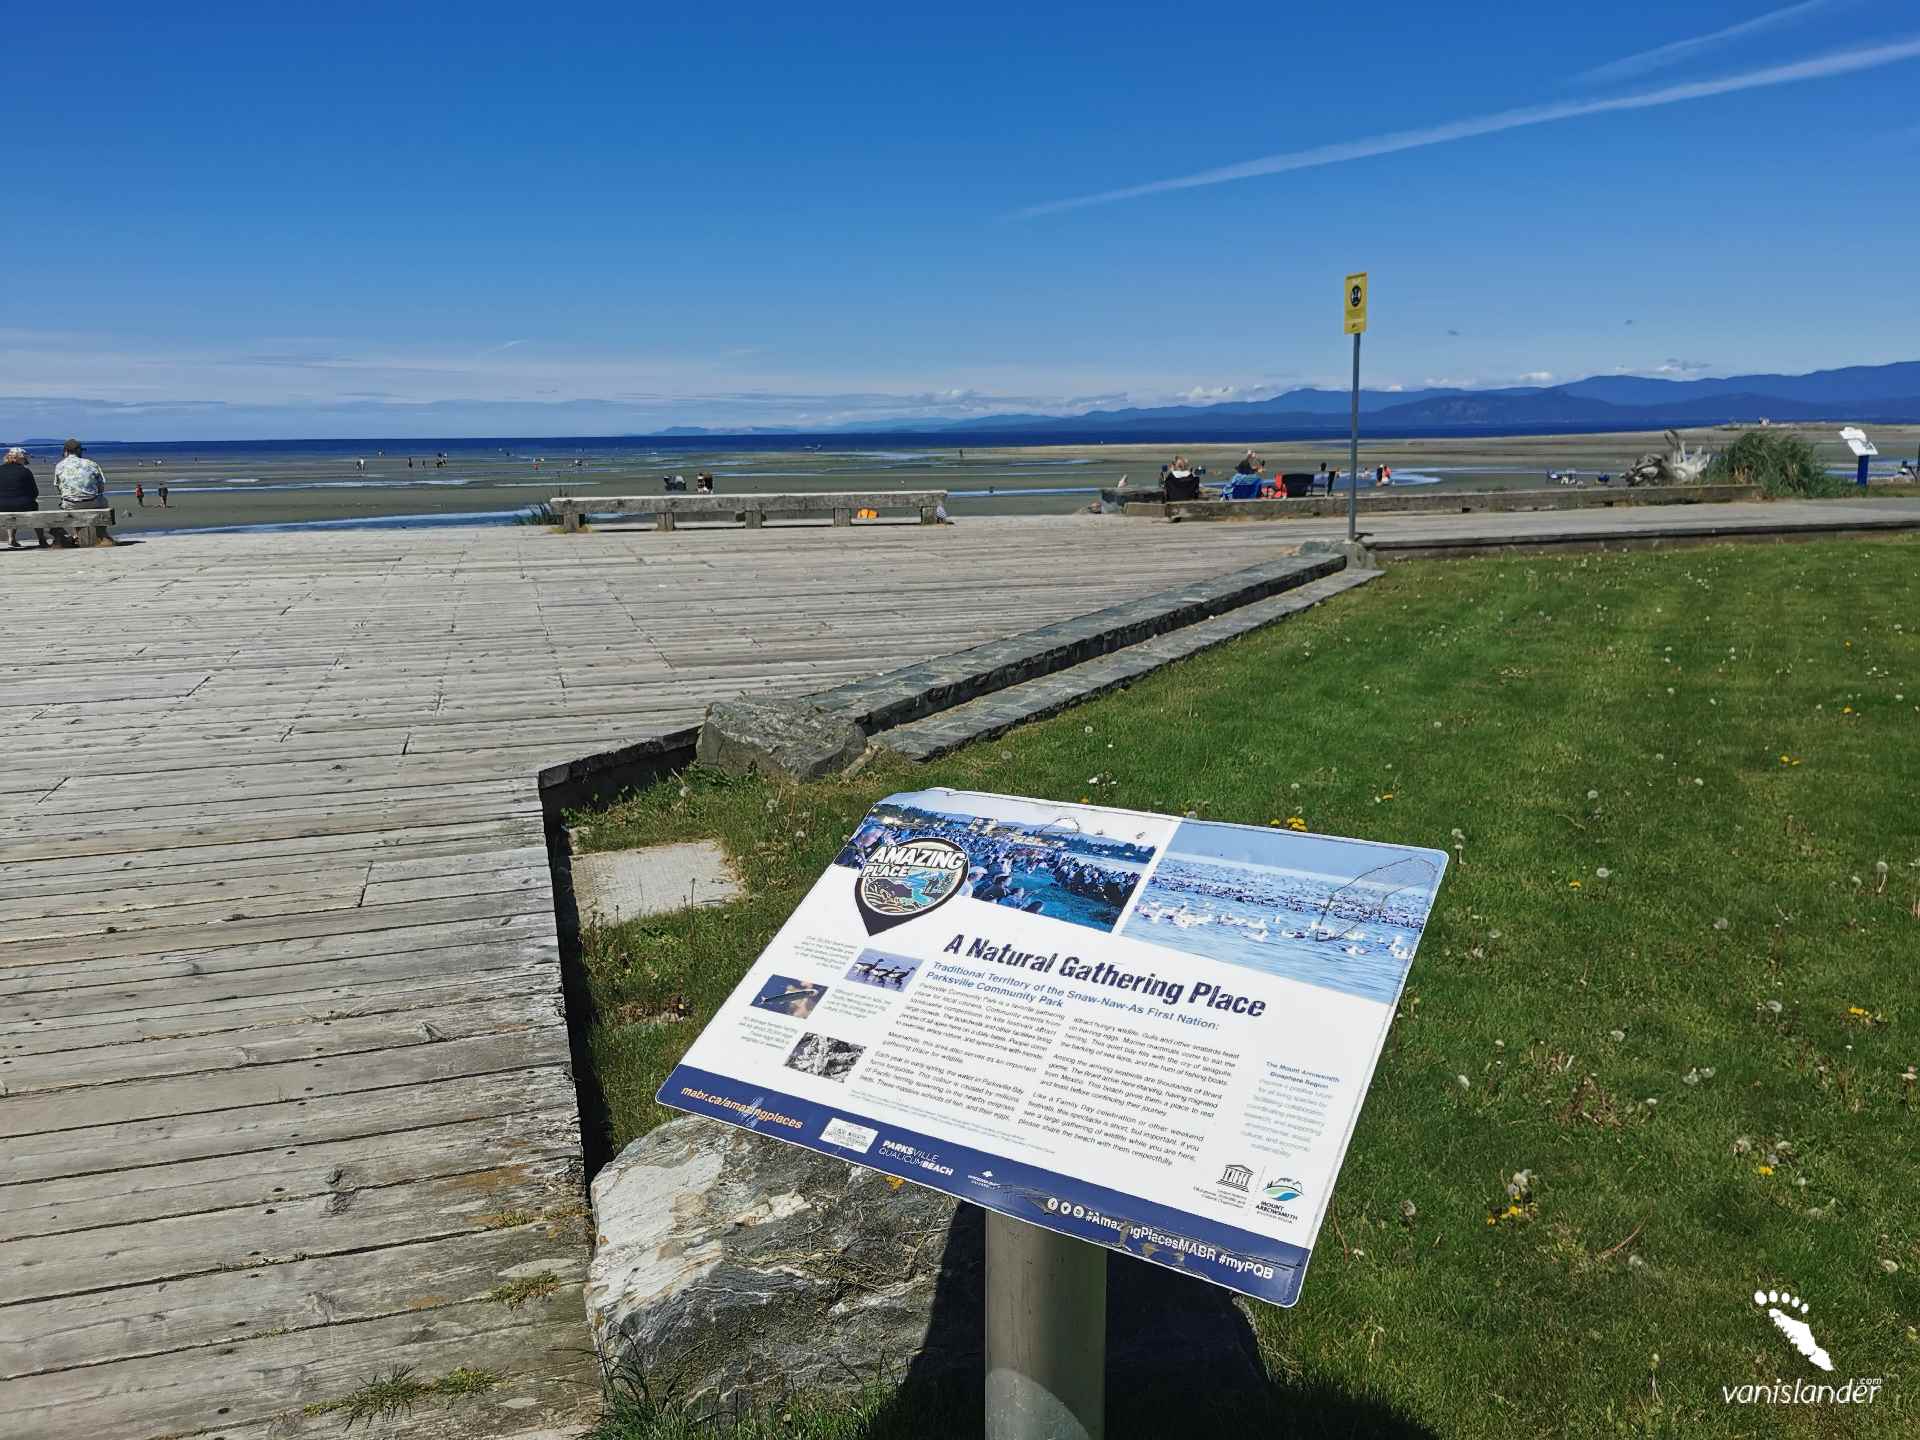 Info board view of Parksville Community Beach Park, Vancouver Island.